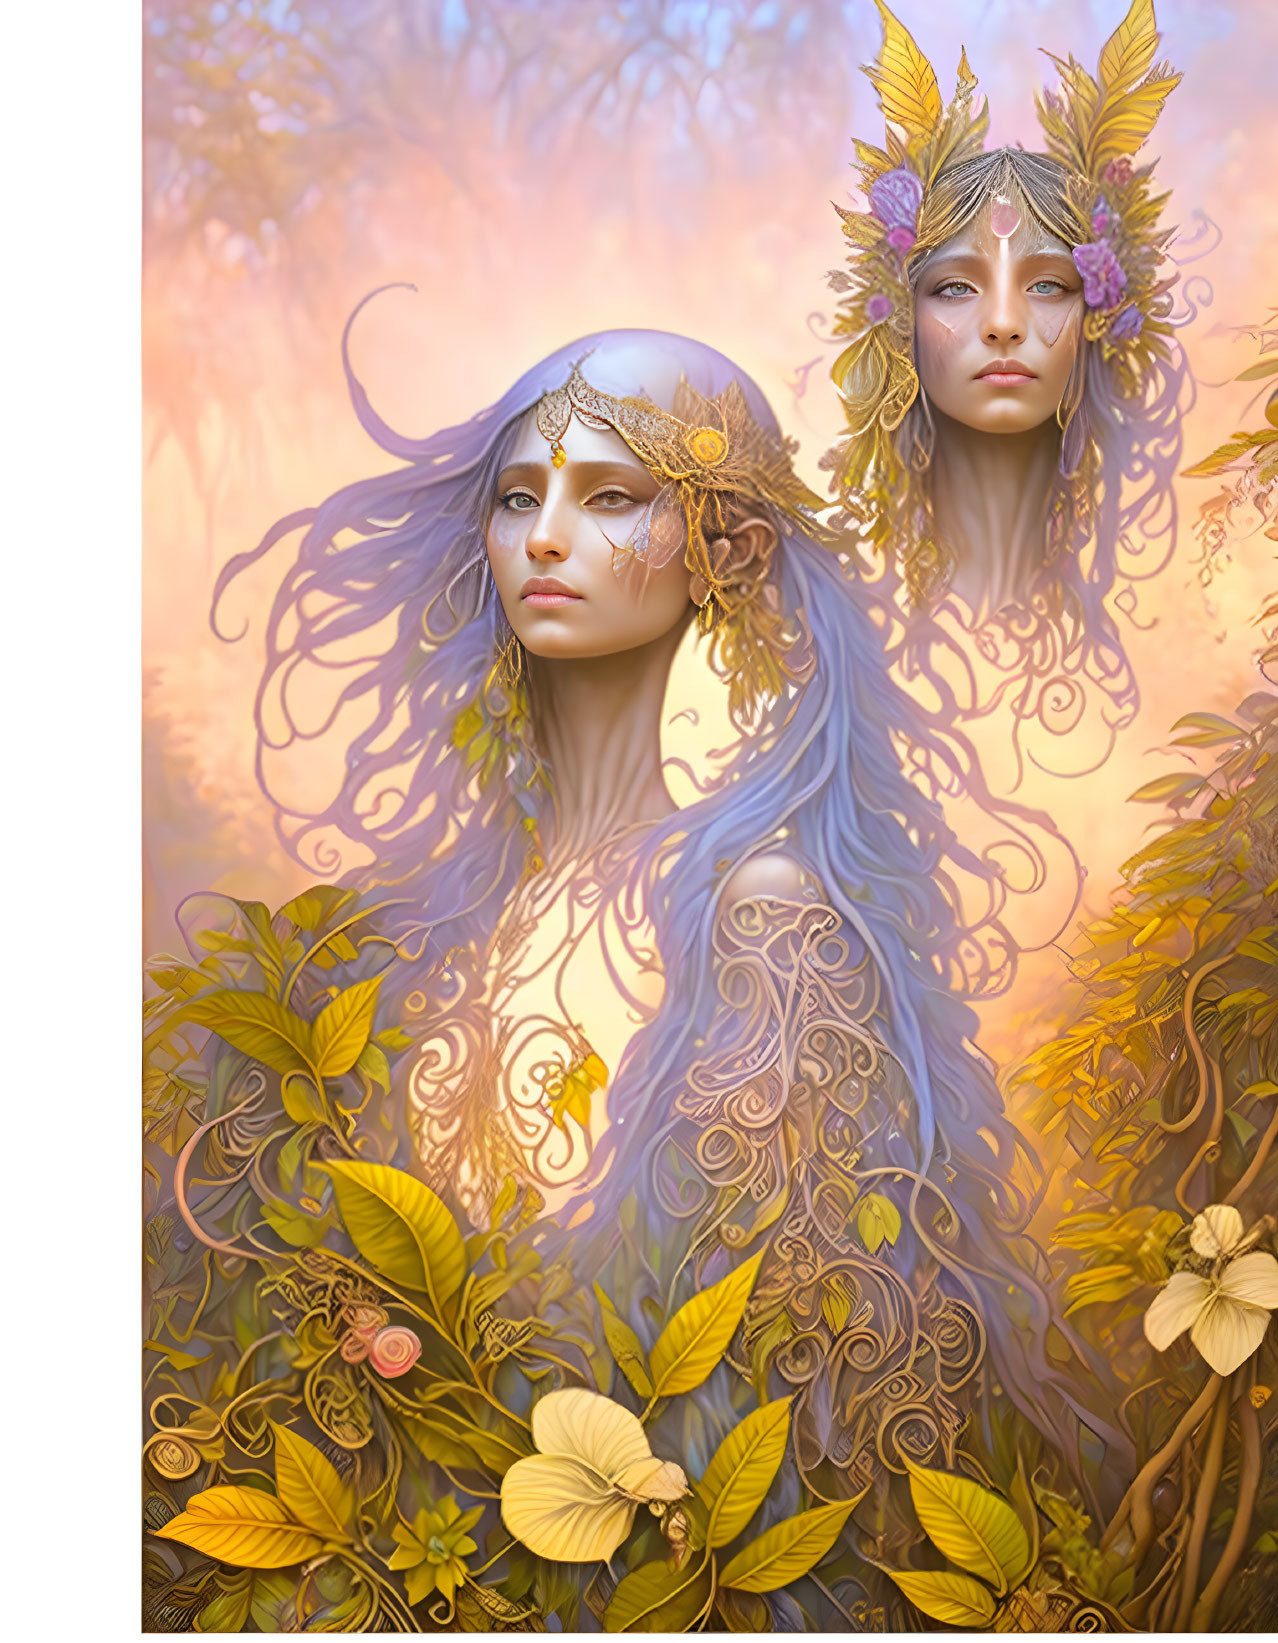 Ethereal beings with wavy hair and ornate headdresses in golden floral setting